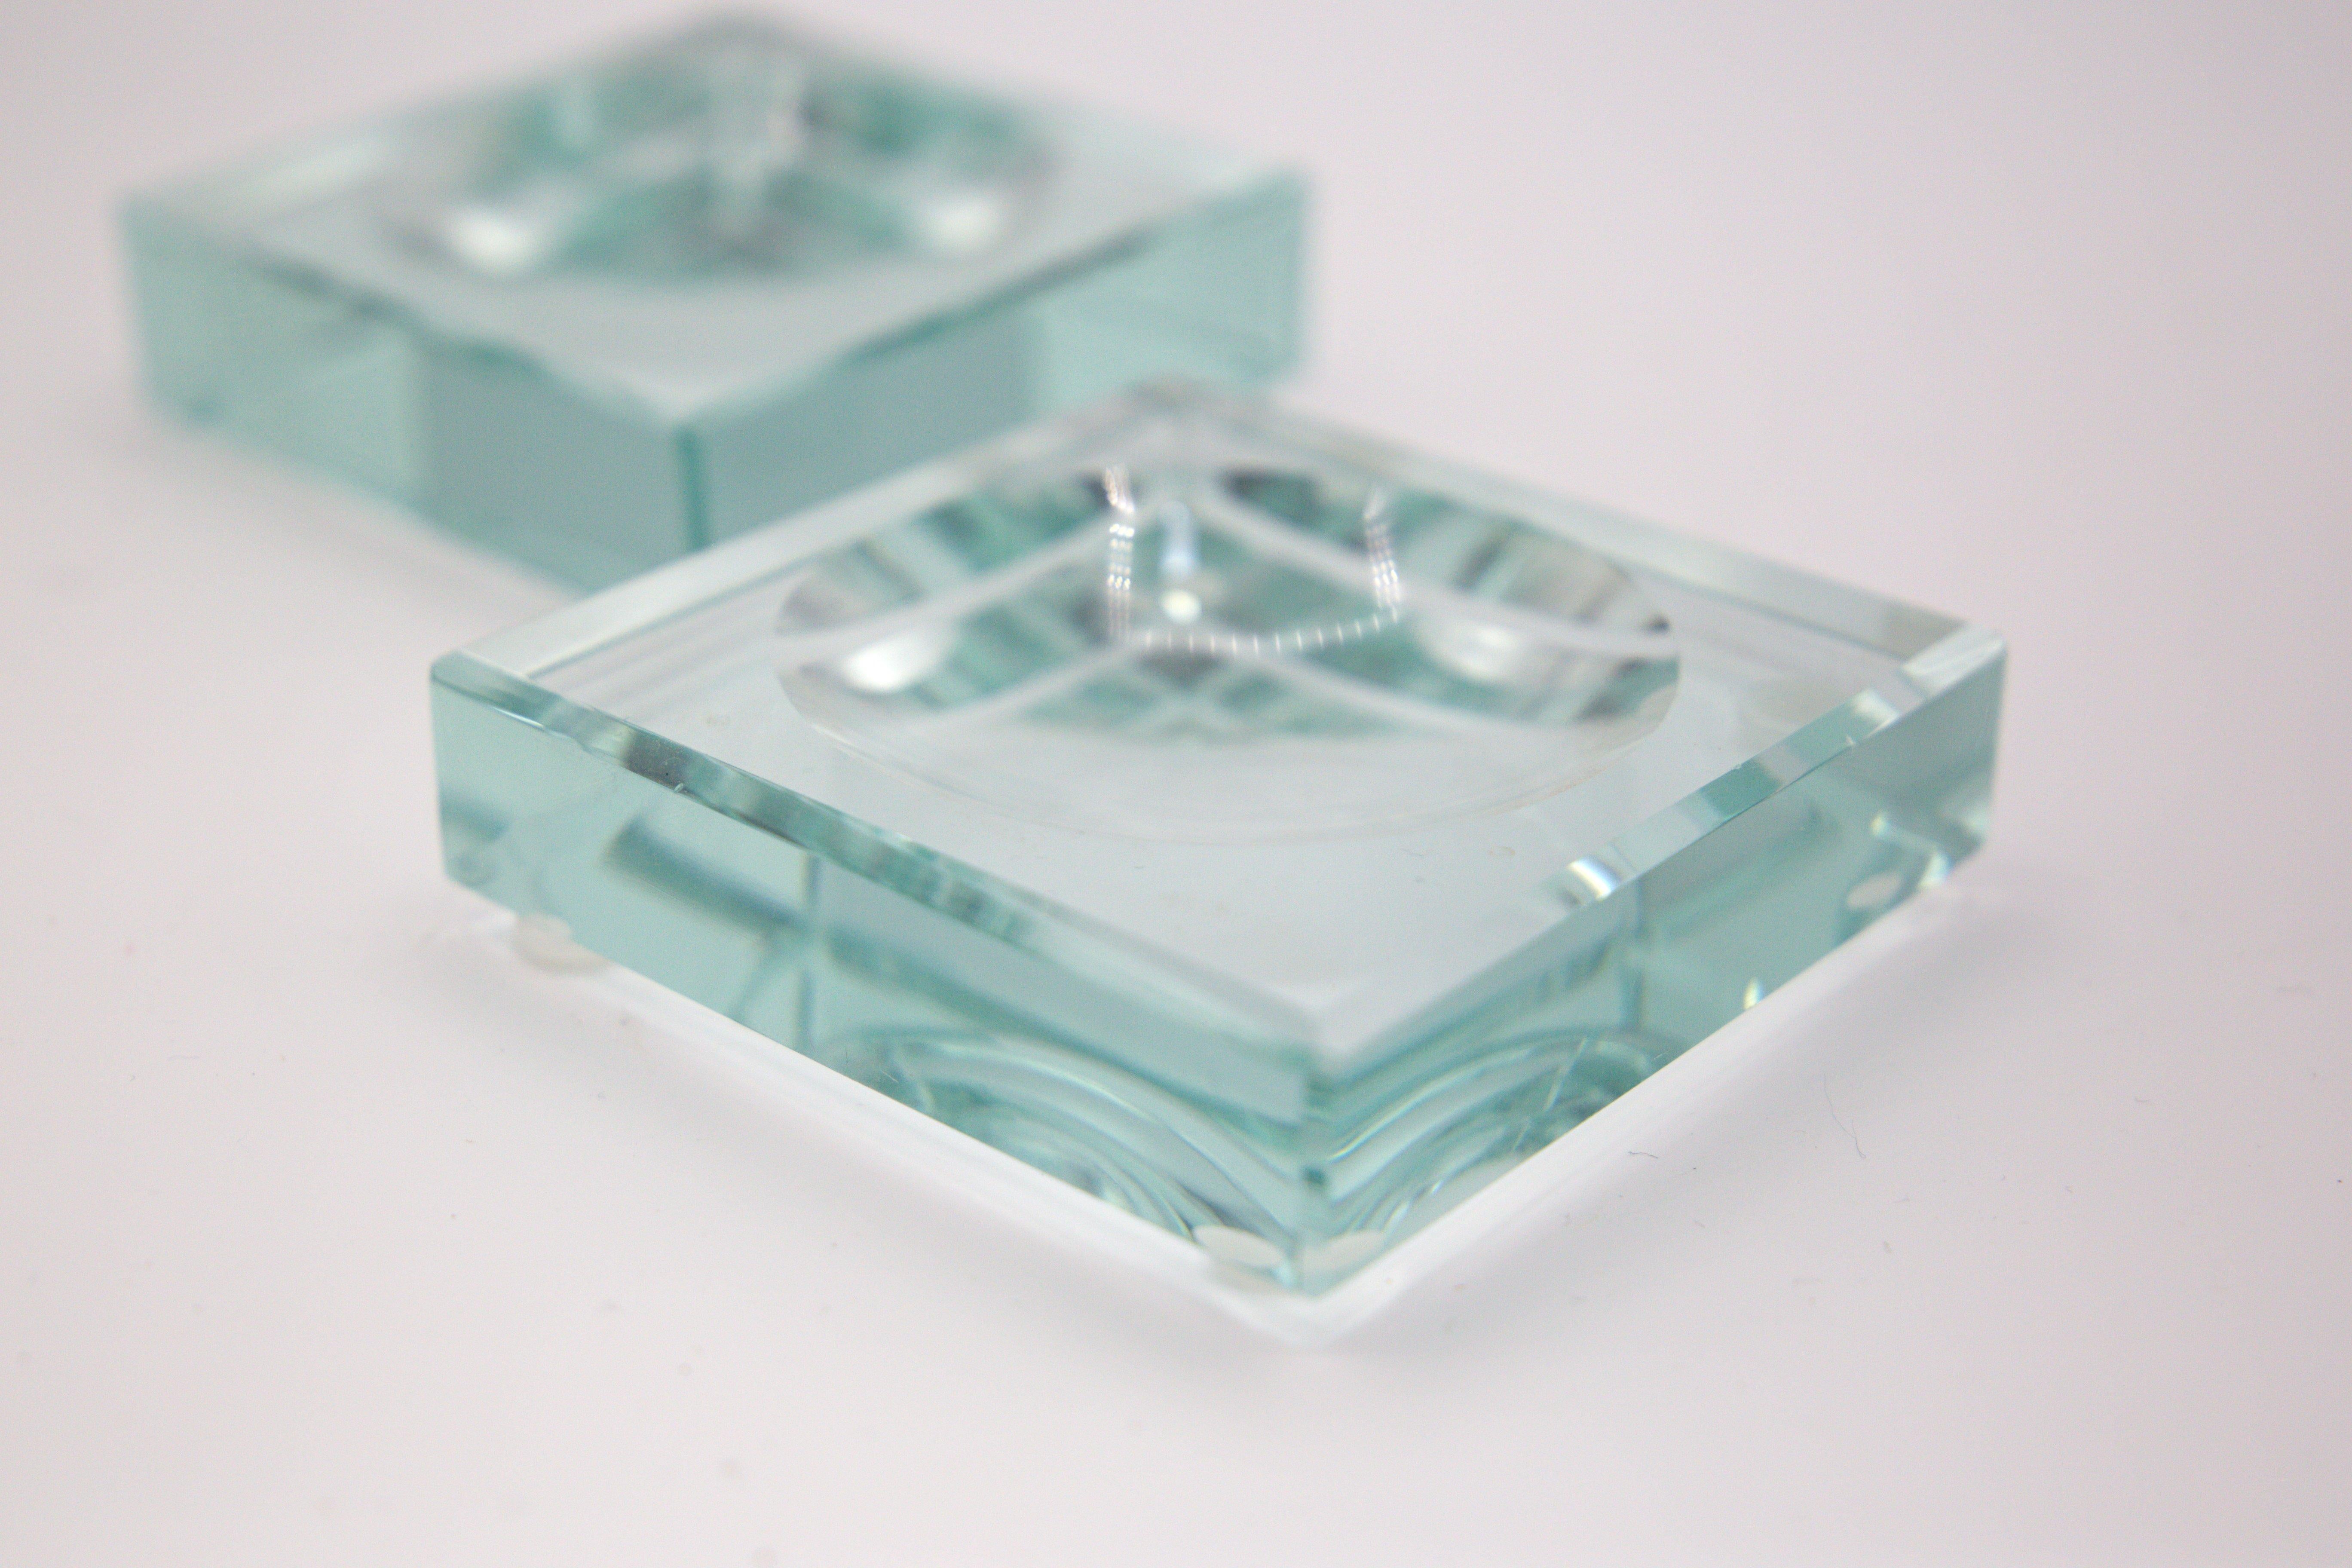 Wonderful pair of crystal ashtrays or pocket emptiers produced by Italian manufacture Fontana Arte in the 1960s.
The ashtrays are square and have a central basin, useful for placing small objects or for smokers.
The ashtrays of Fontana Arte are